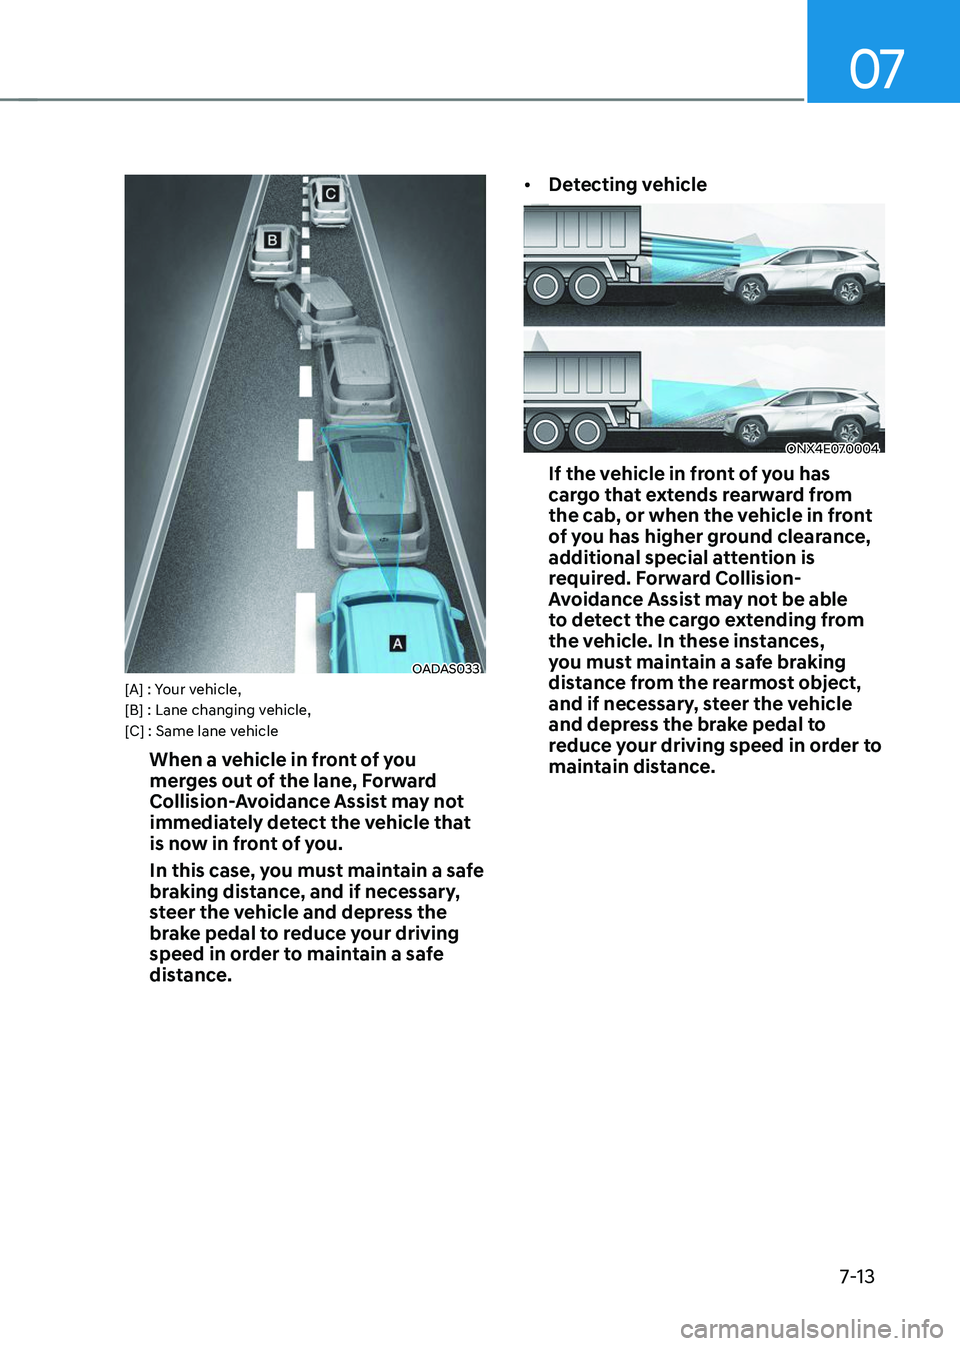 HYUNDAI TUCSON 2023  Owners Manual 07
7-13
OADAS033[A] : Your vehicle, 
[B] : Lane changing vehicle,
[C] : Same lane vehicle
When a vehicle in front of you 
merges out of the lane, Forward 
Collision-Avoidance Assist may not 
immediate